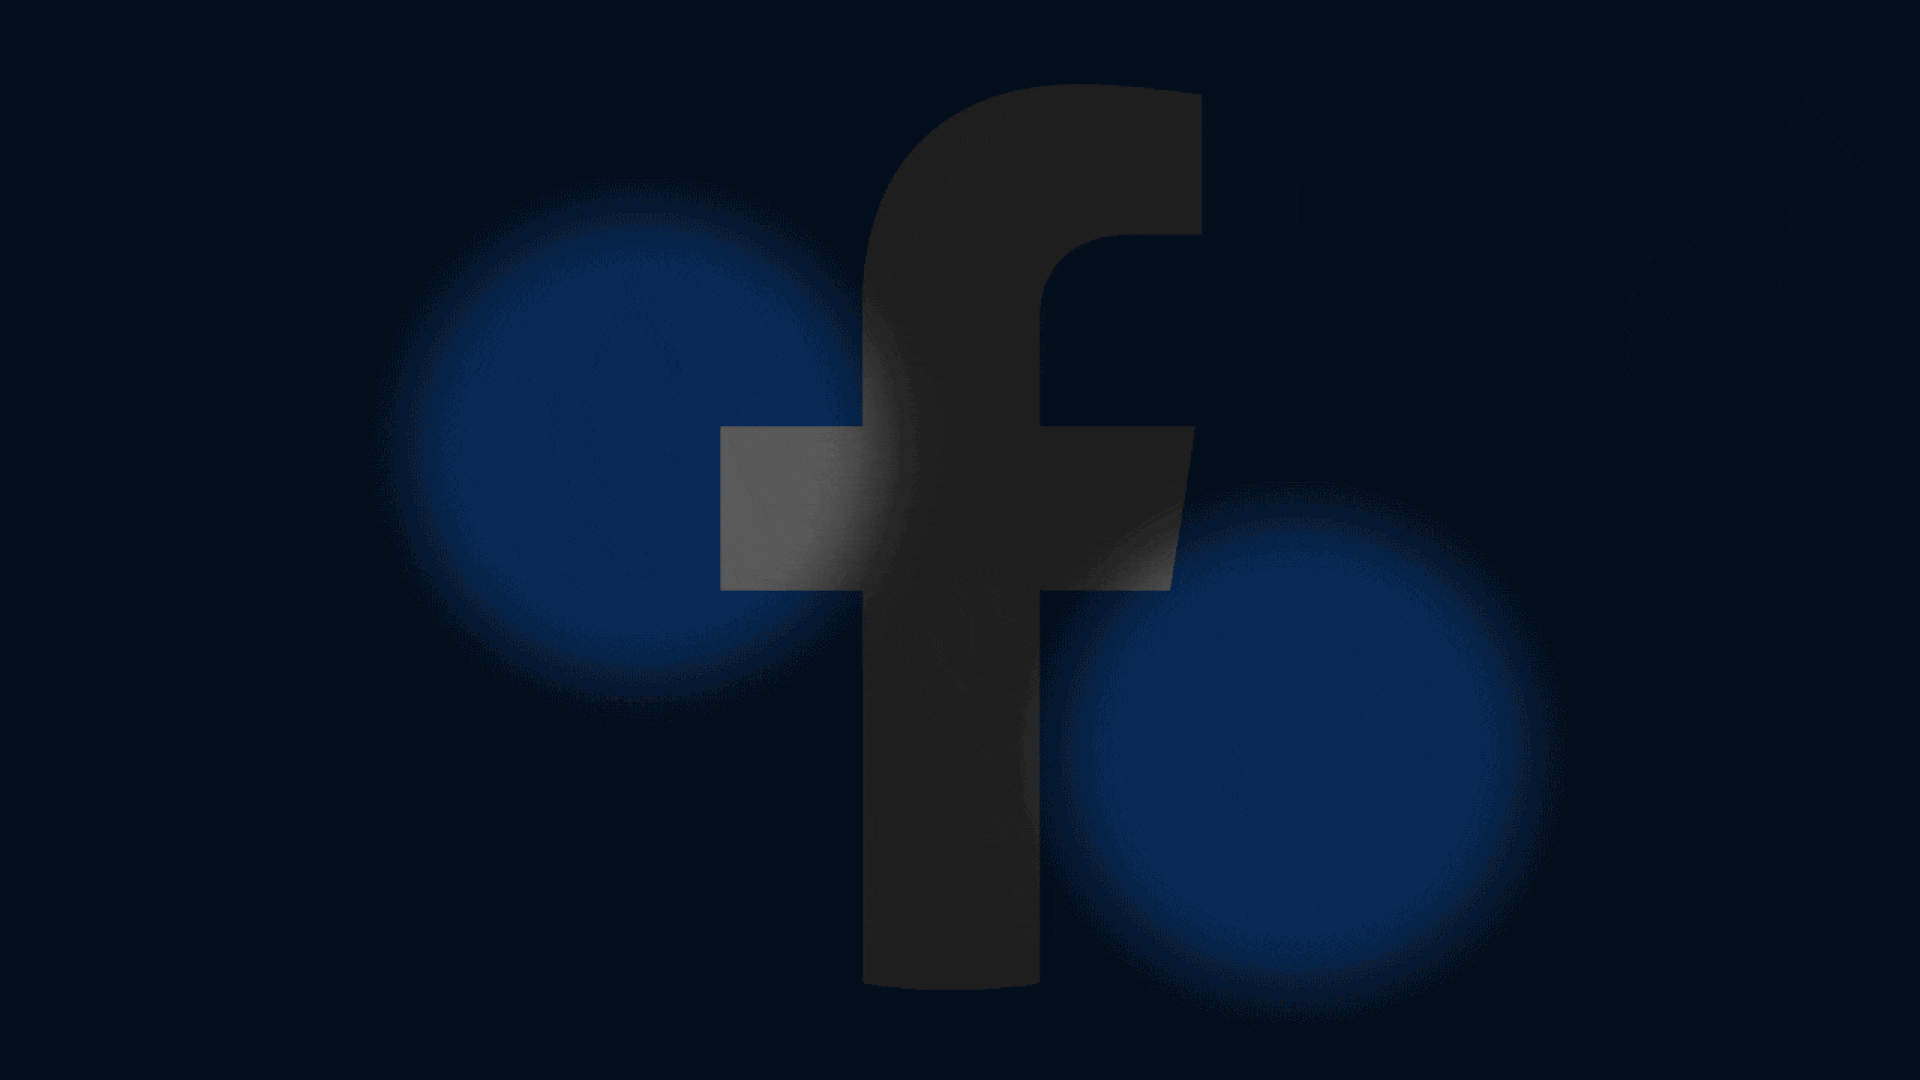 Animated illustration of spotlights moving around to reveal pieces of the Facebook logo